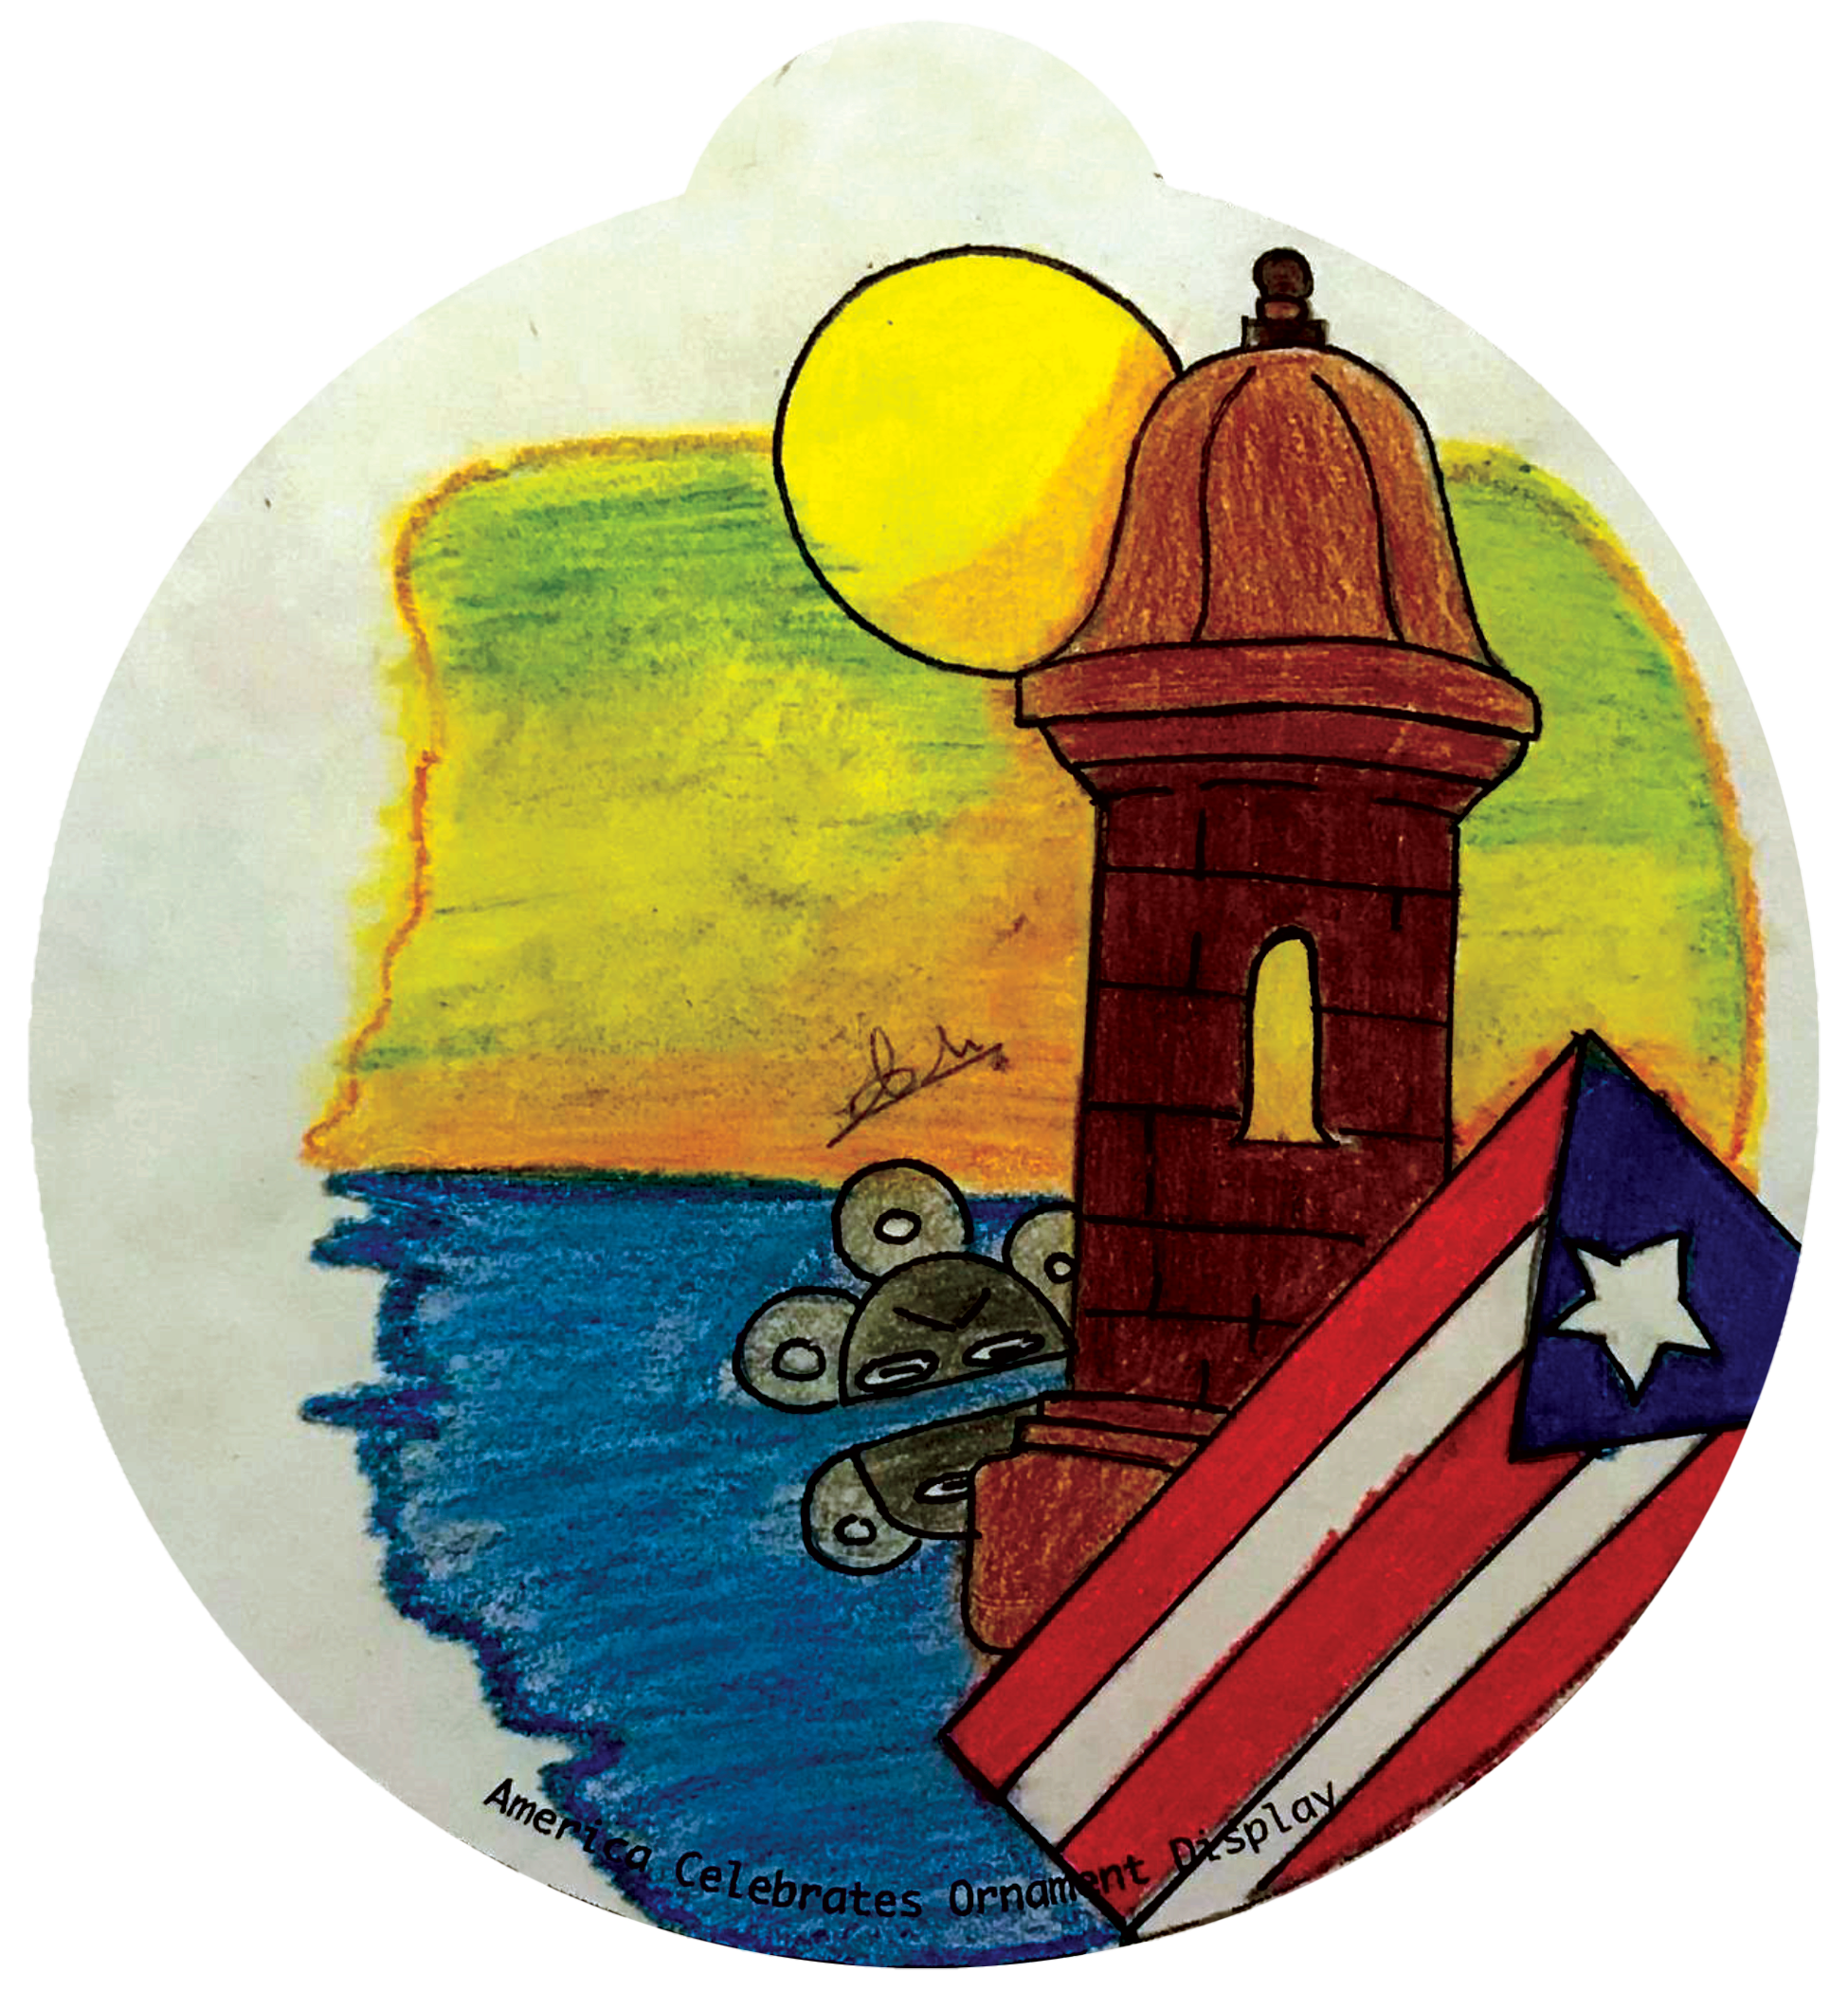 ornament depicting the Puerto Rico flag, a stone tower, and the ocean against a sunset